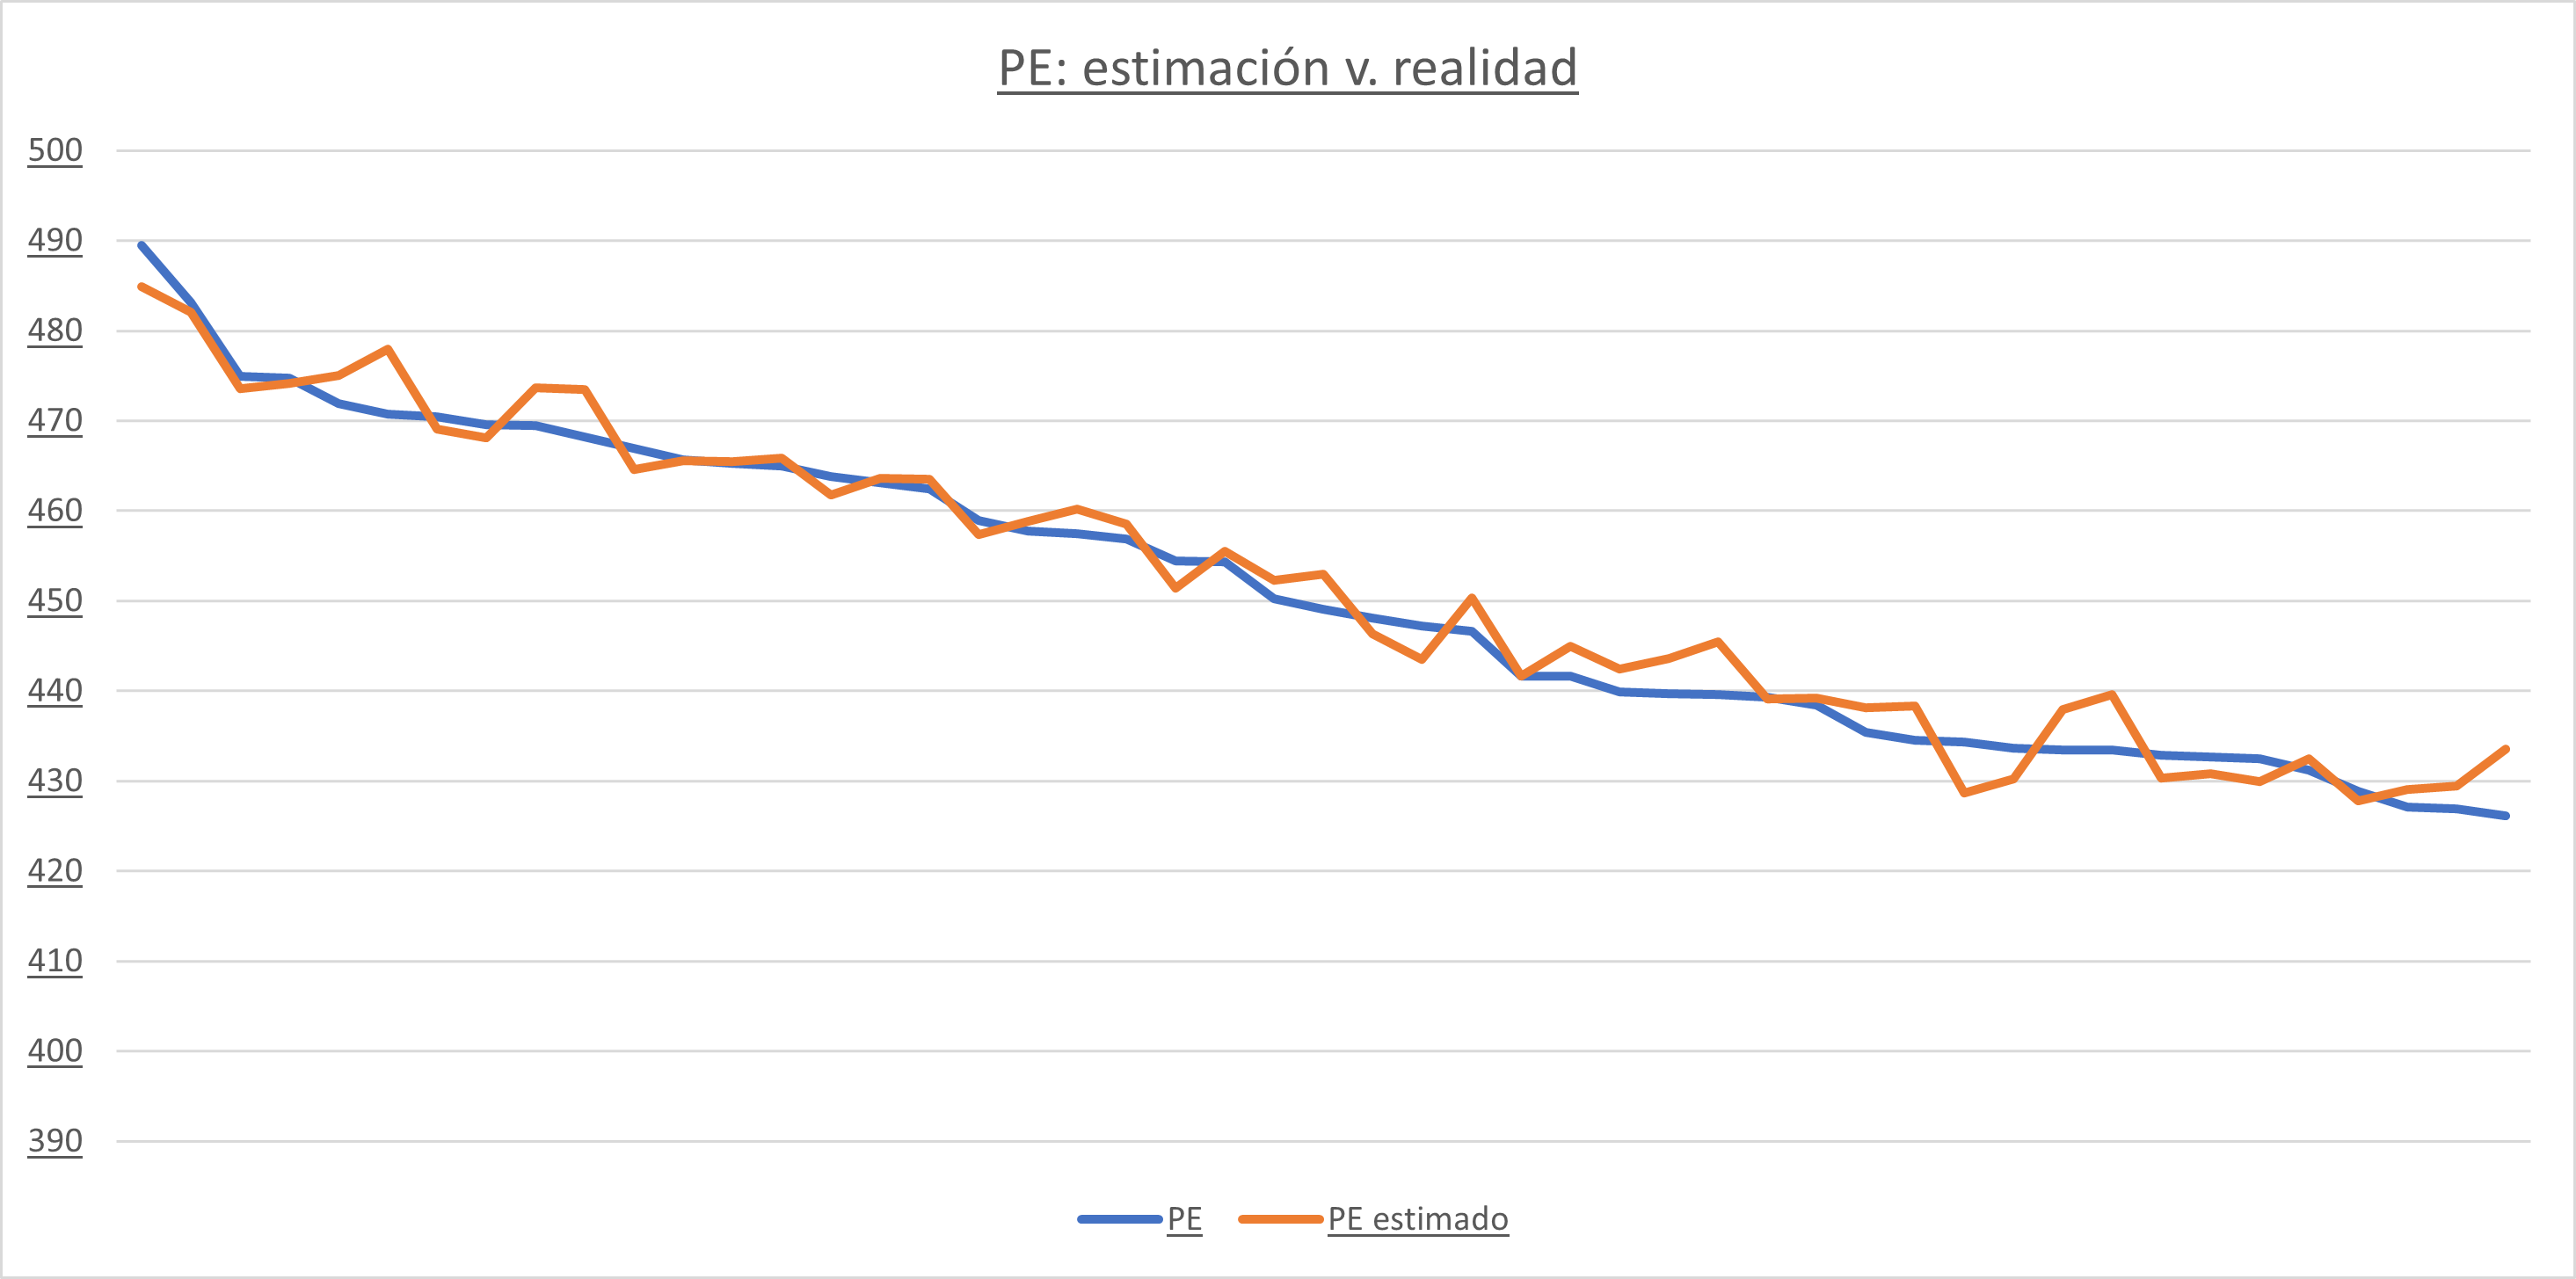 Comparison between predicted electrical output (orange) and real data (blue). I sorted the values in decreasing order of real electrical power so the downward trend is completely meaningless.